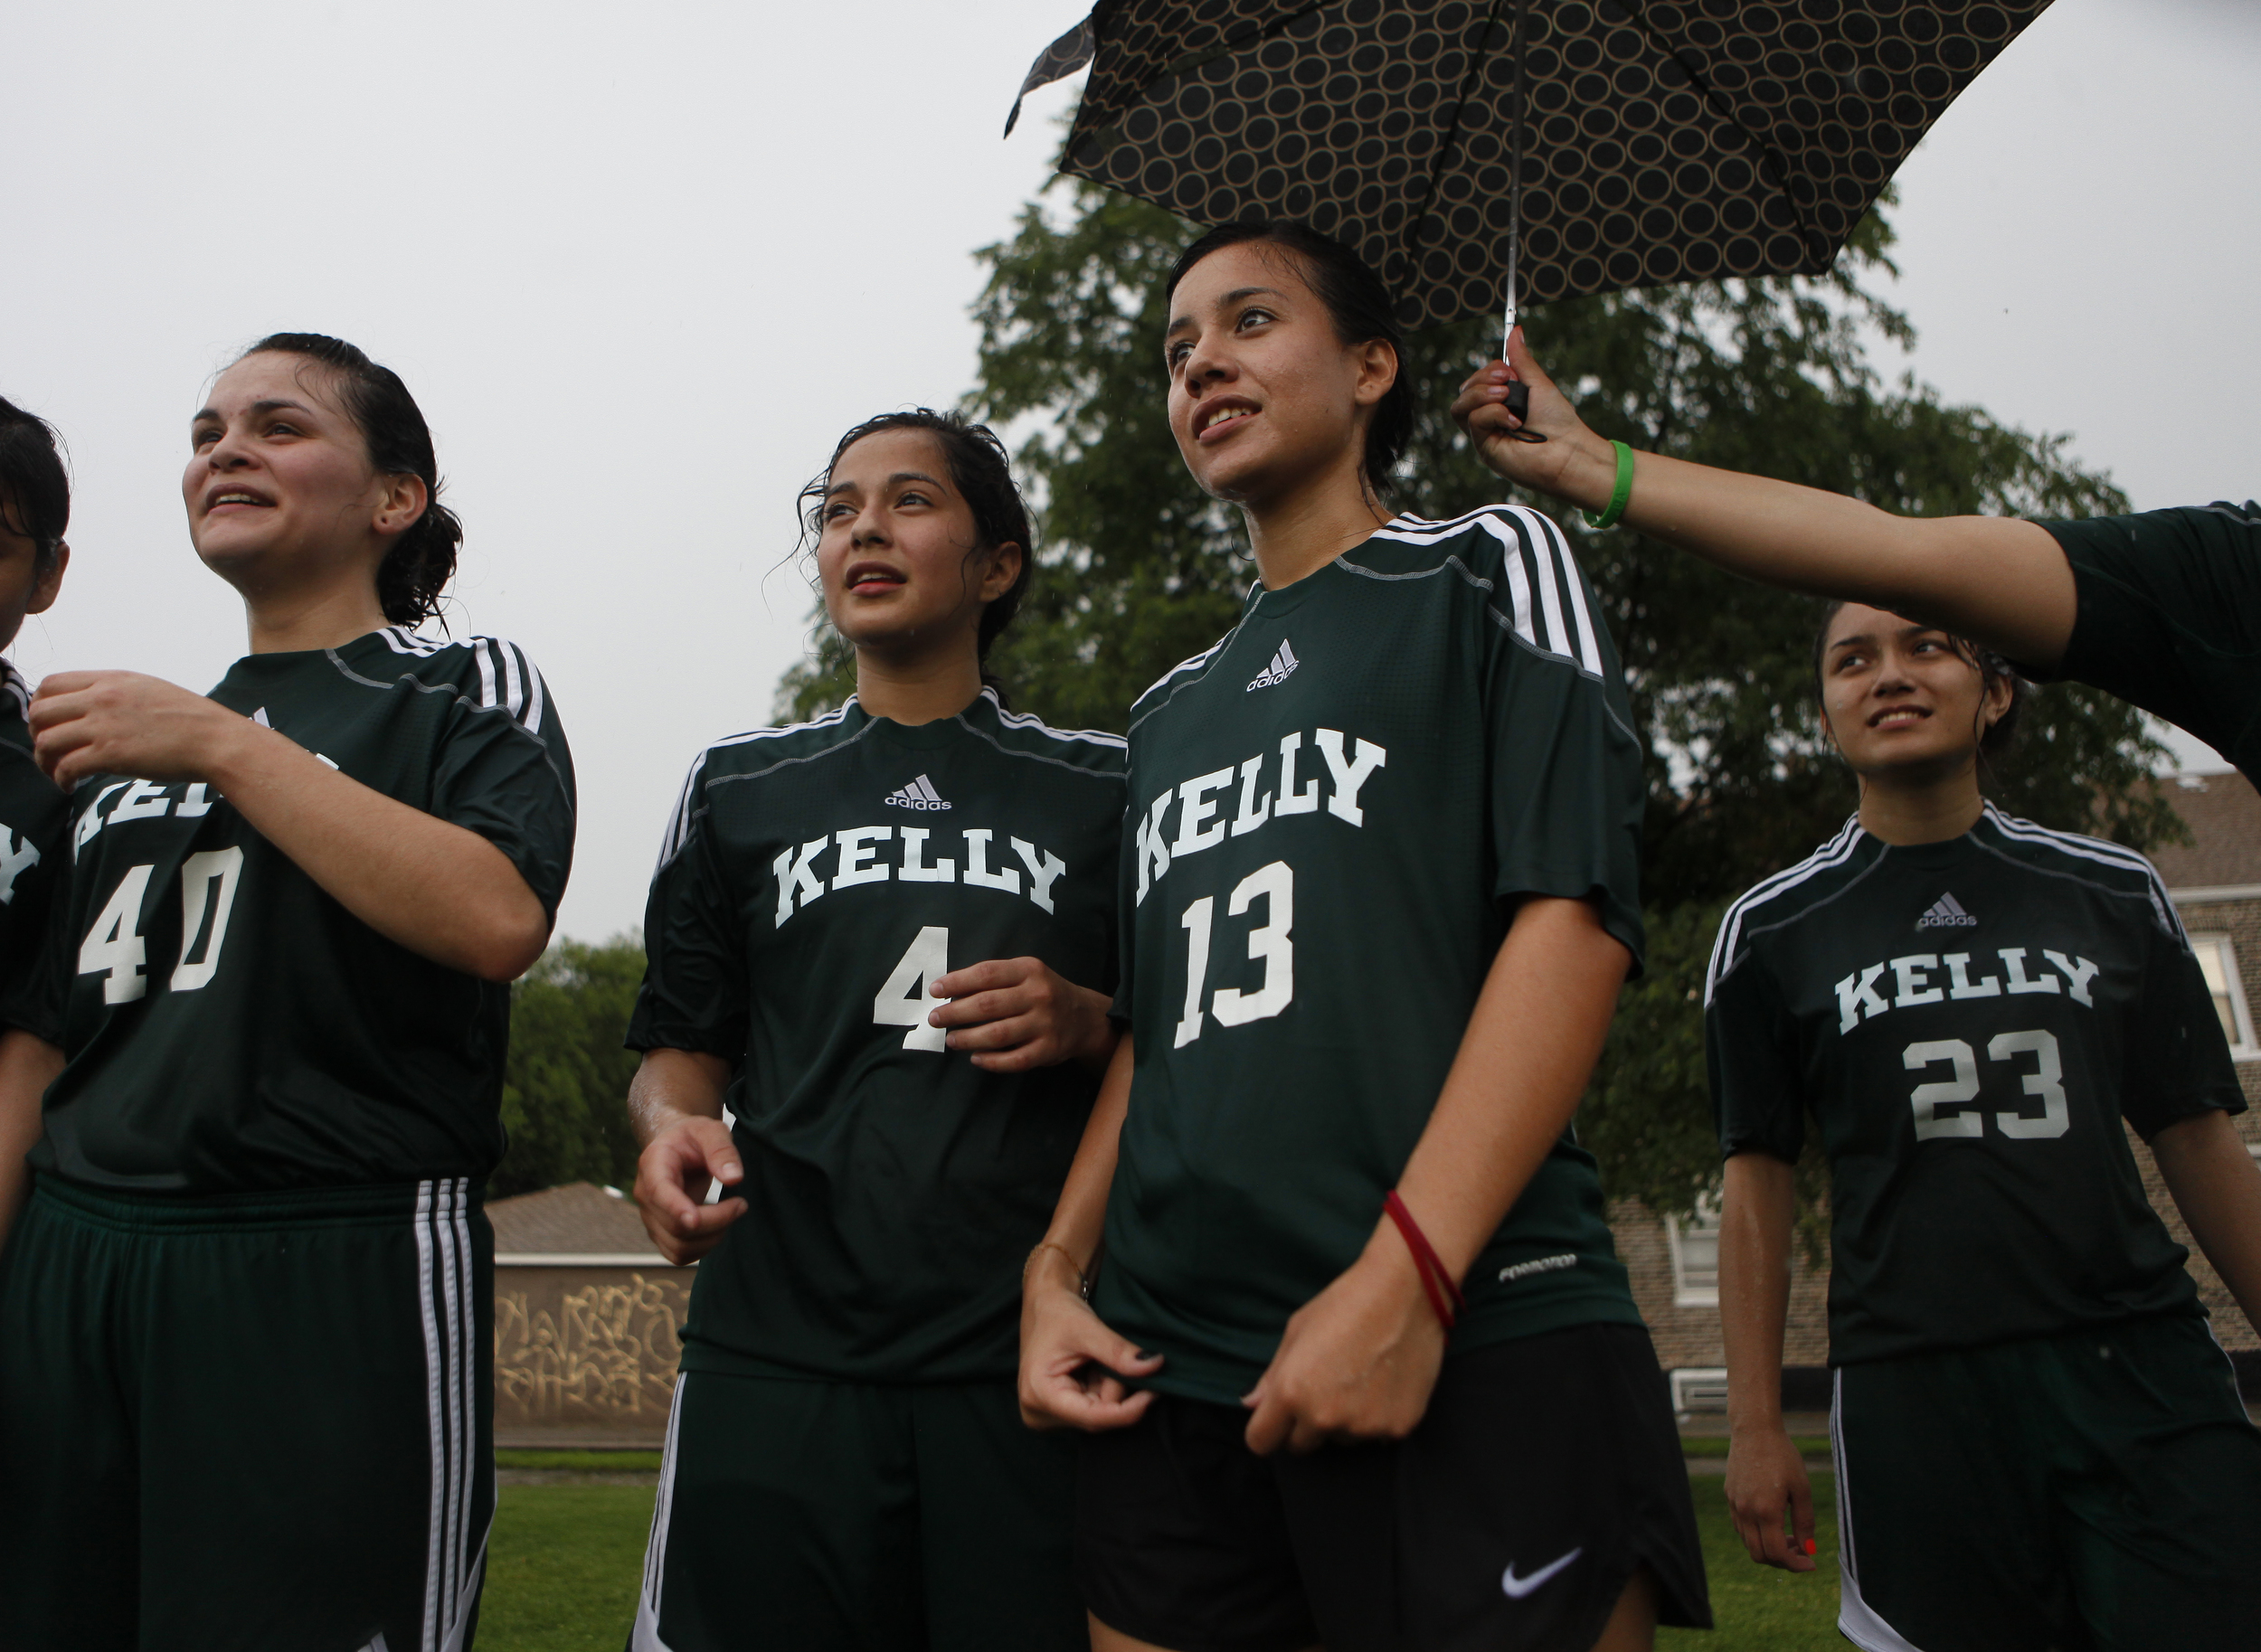  Cynthia Lucio, a junior, holds an umbrella out over Edith Garcia and Ana Flores' heads during practice in front of the Kelly High School in Chicago on Tuesday, June 11, 2013. &nbsp;The Kelly High School girls varsity soccer team is almost entirely f